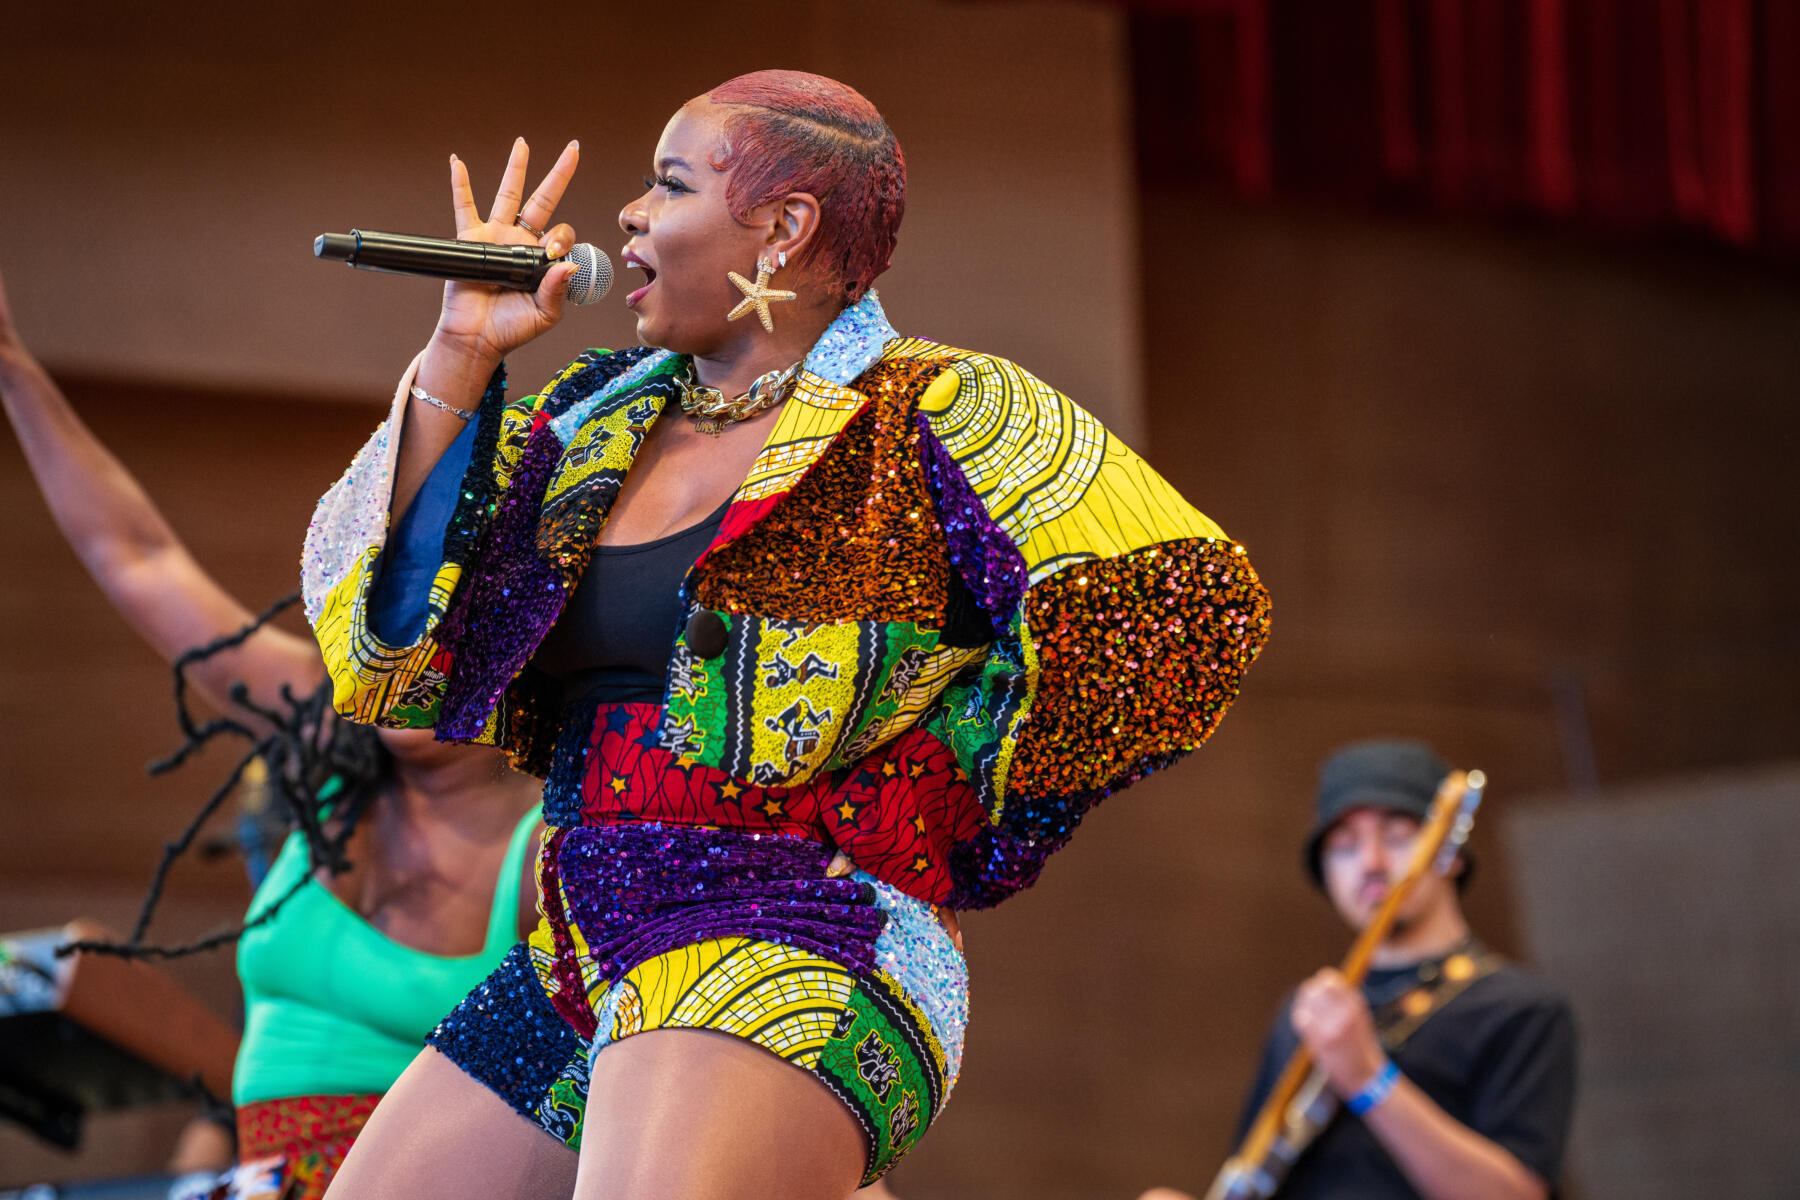 Yemi Alade performs at the Pritzker Pavilion as part of the Millennium Park Summer Music Serie